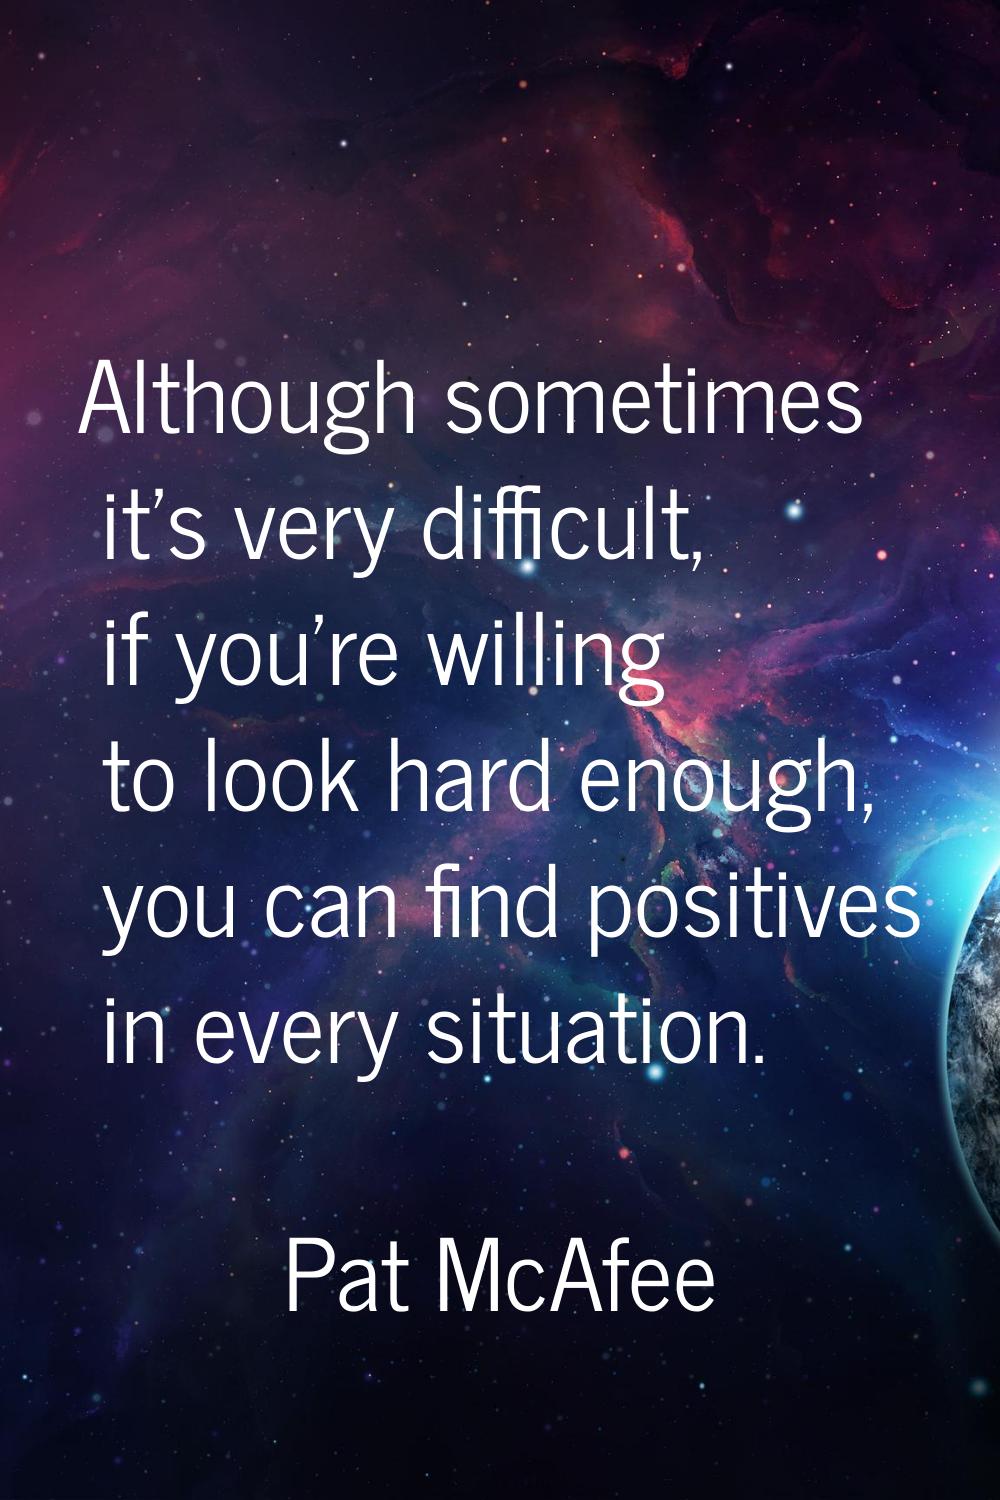 Although sometimes it's very difficult, if you're willing to look hard enough, you can find positiv